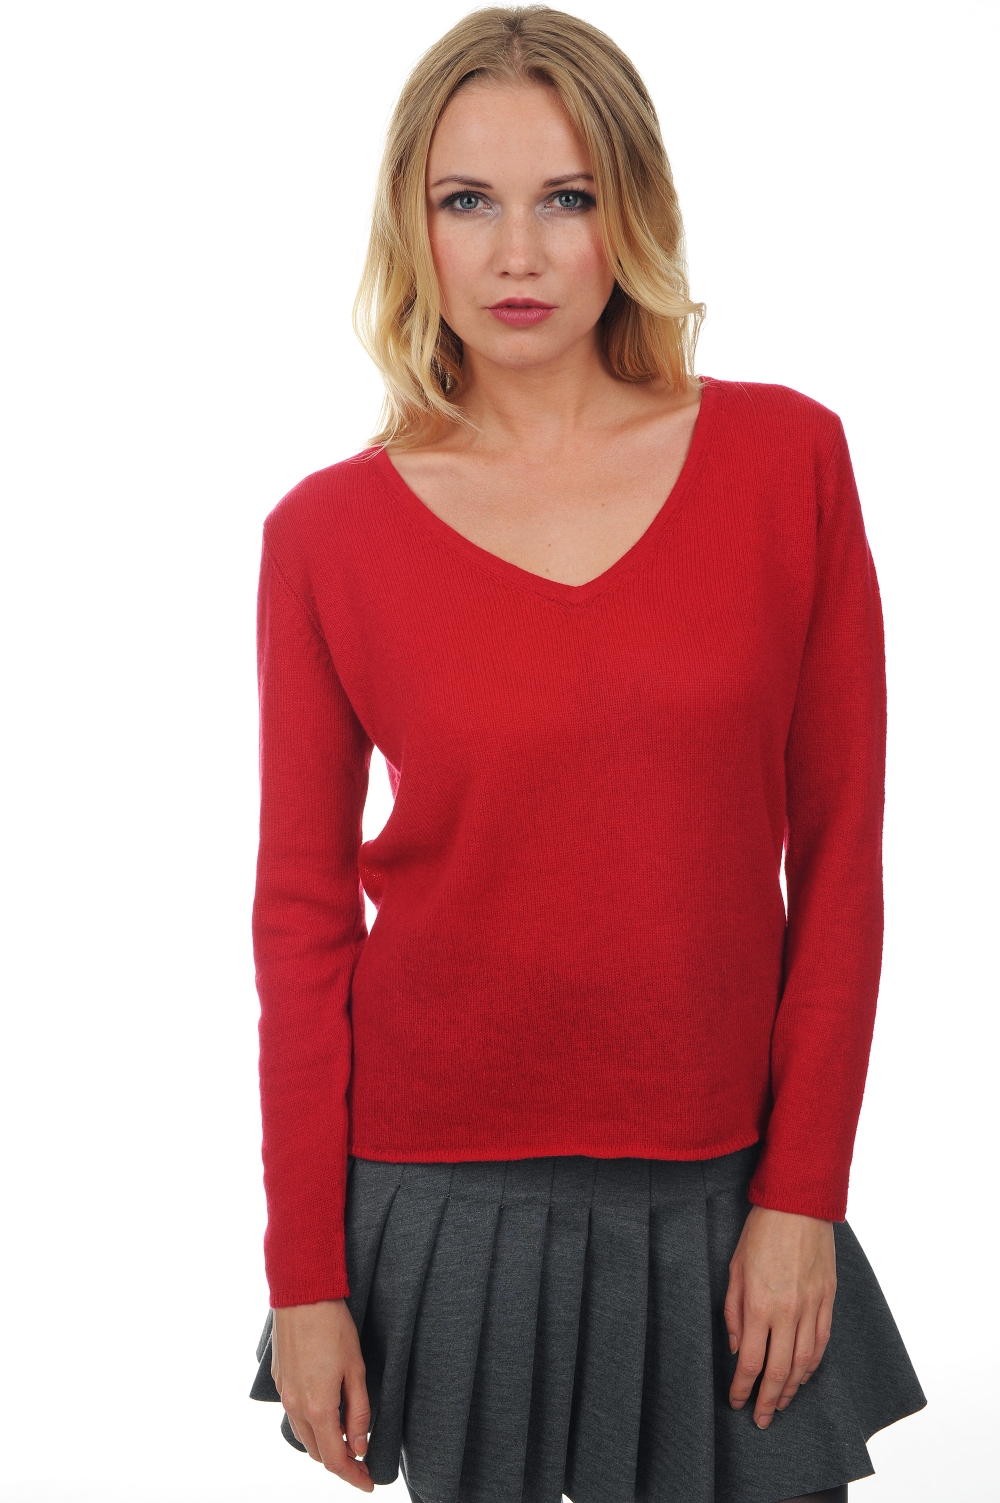 Cashmere ladies basic sweaters at low prices flavie blood red 2xl